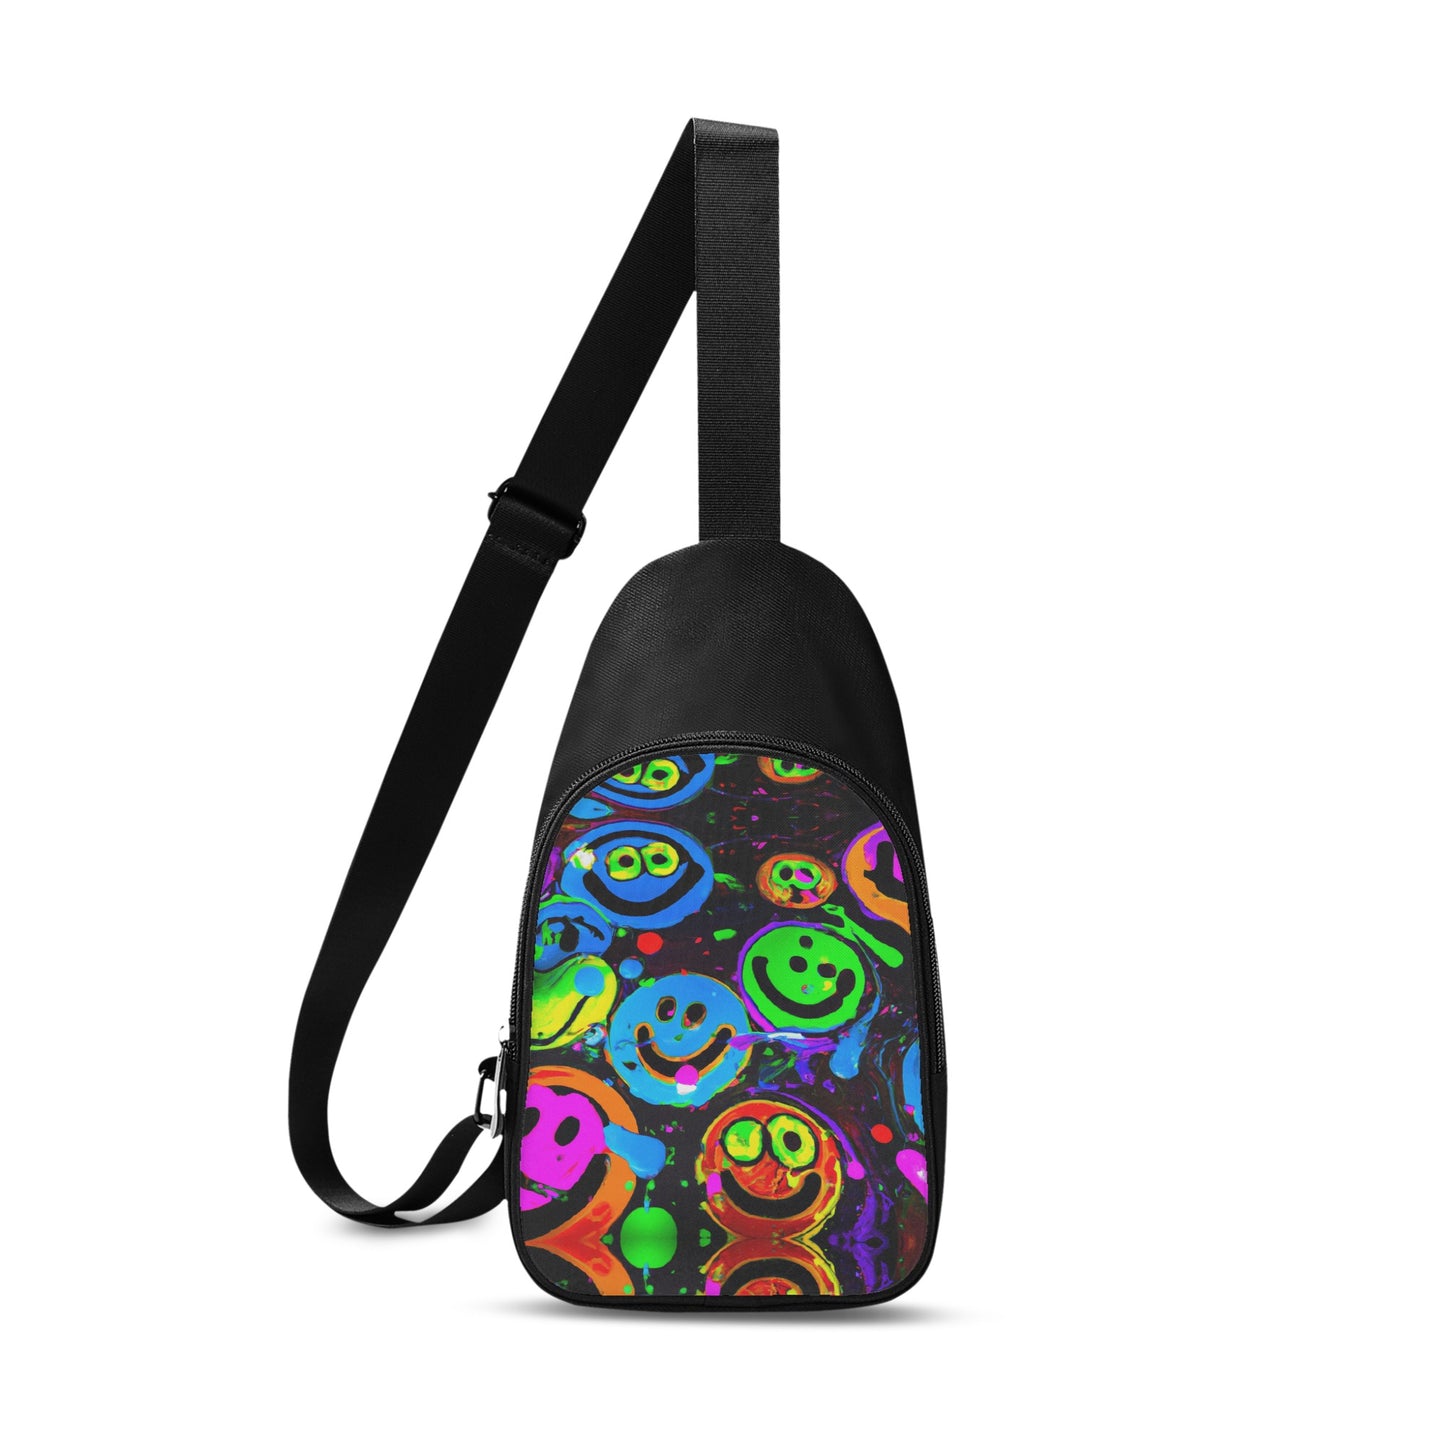 All the smiles, all the time.  Brighten up your day with this statement bag.  The Neon Acid Smile Chest bag is unisex with a printed design of the coolest smiley faces around.